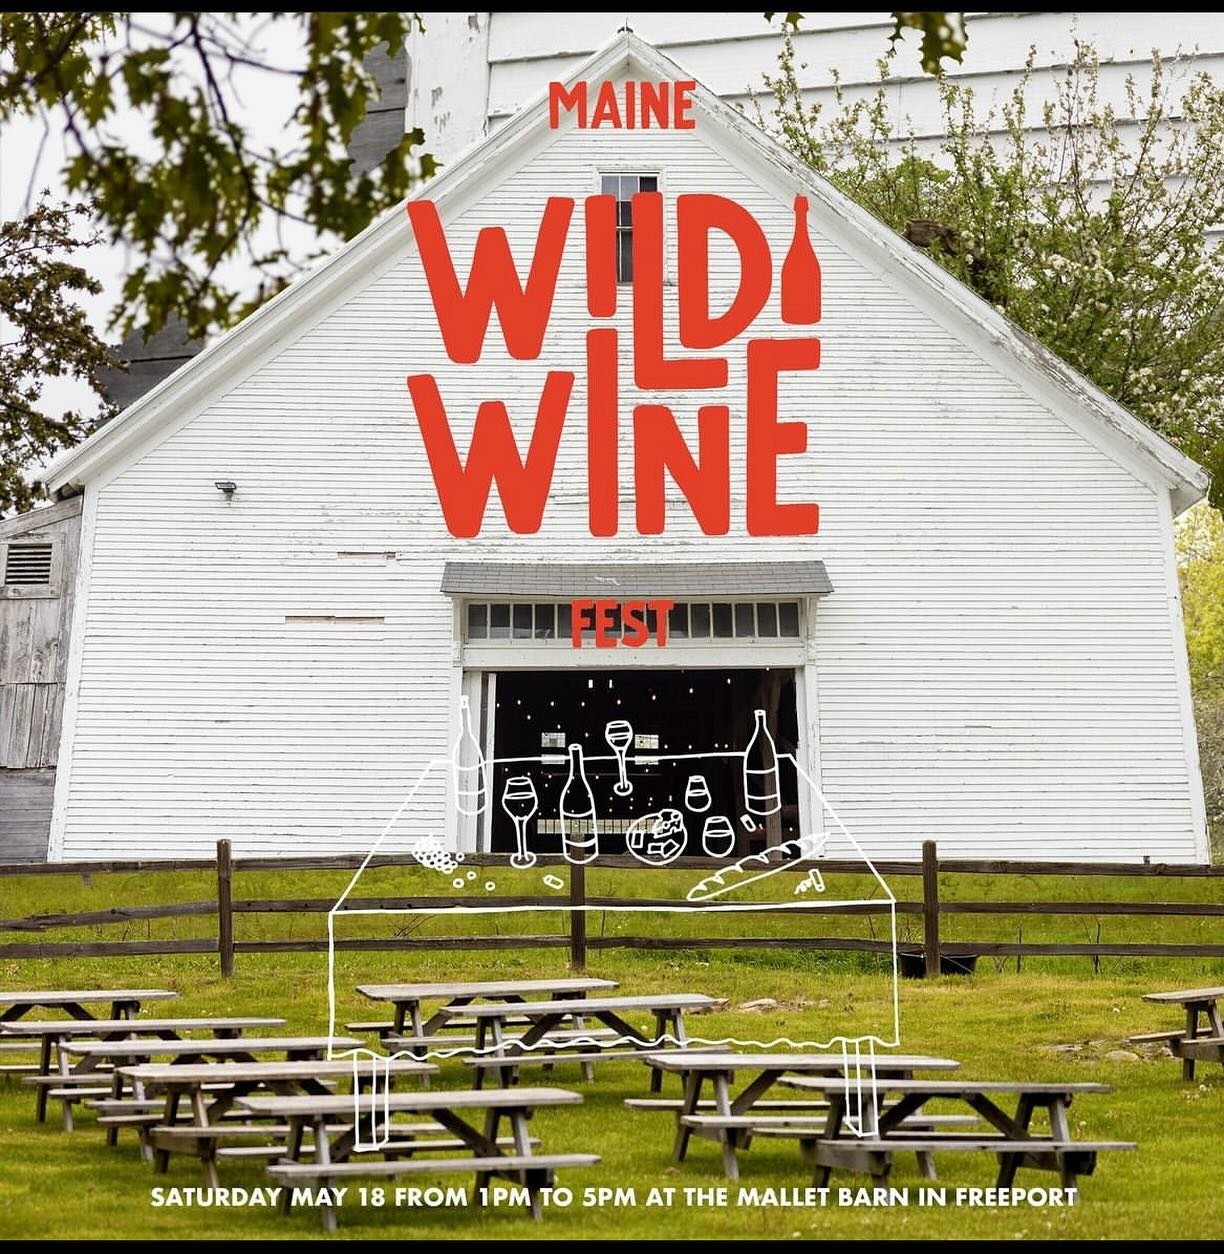 Any plans this weekend? Come hang with us in Maine!
Saturday 5/18 @mainewildwinefest 
10am to 3pm in Freeport, ME
Limited Tickets still available.
Sunday 5/19 kick it with us @lornewine 
Burgers, JJ, and ice cream, enough said.
2 pm to 5 pm in Biddef